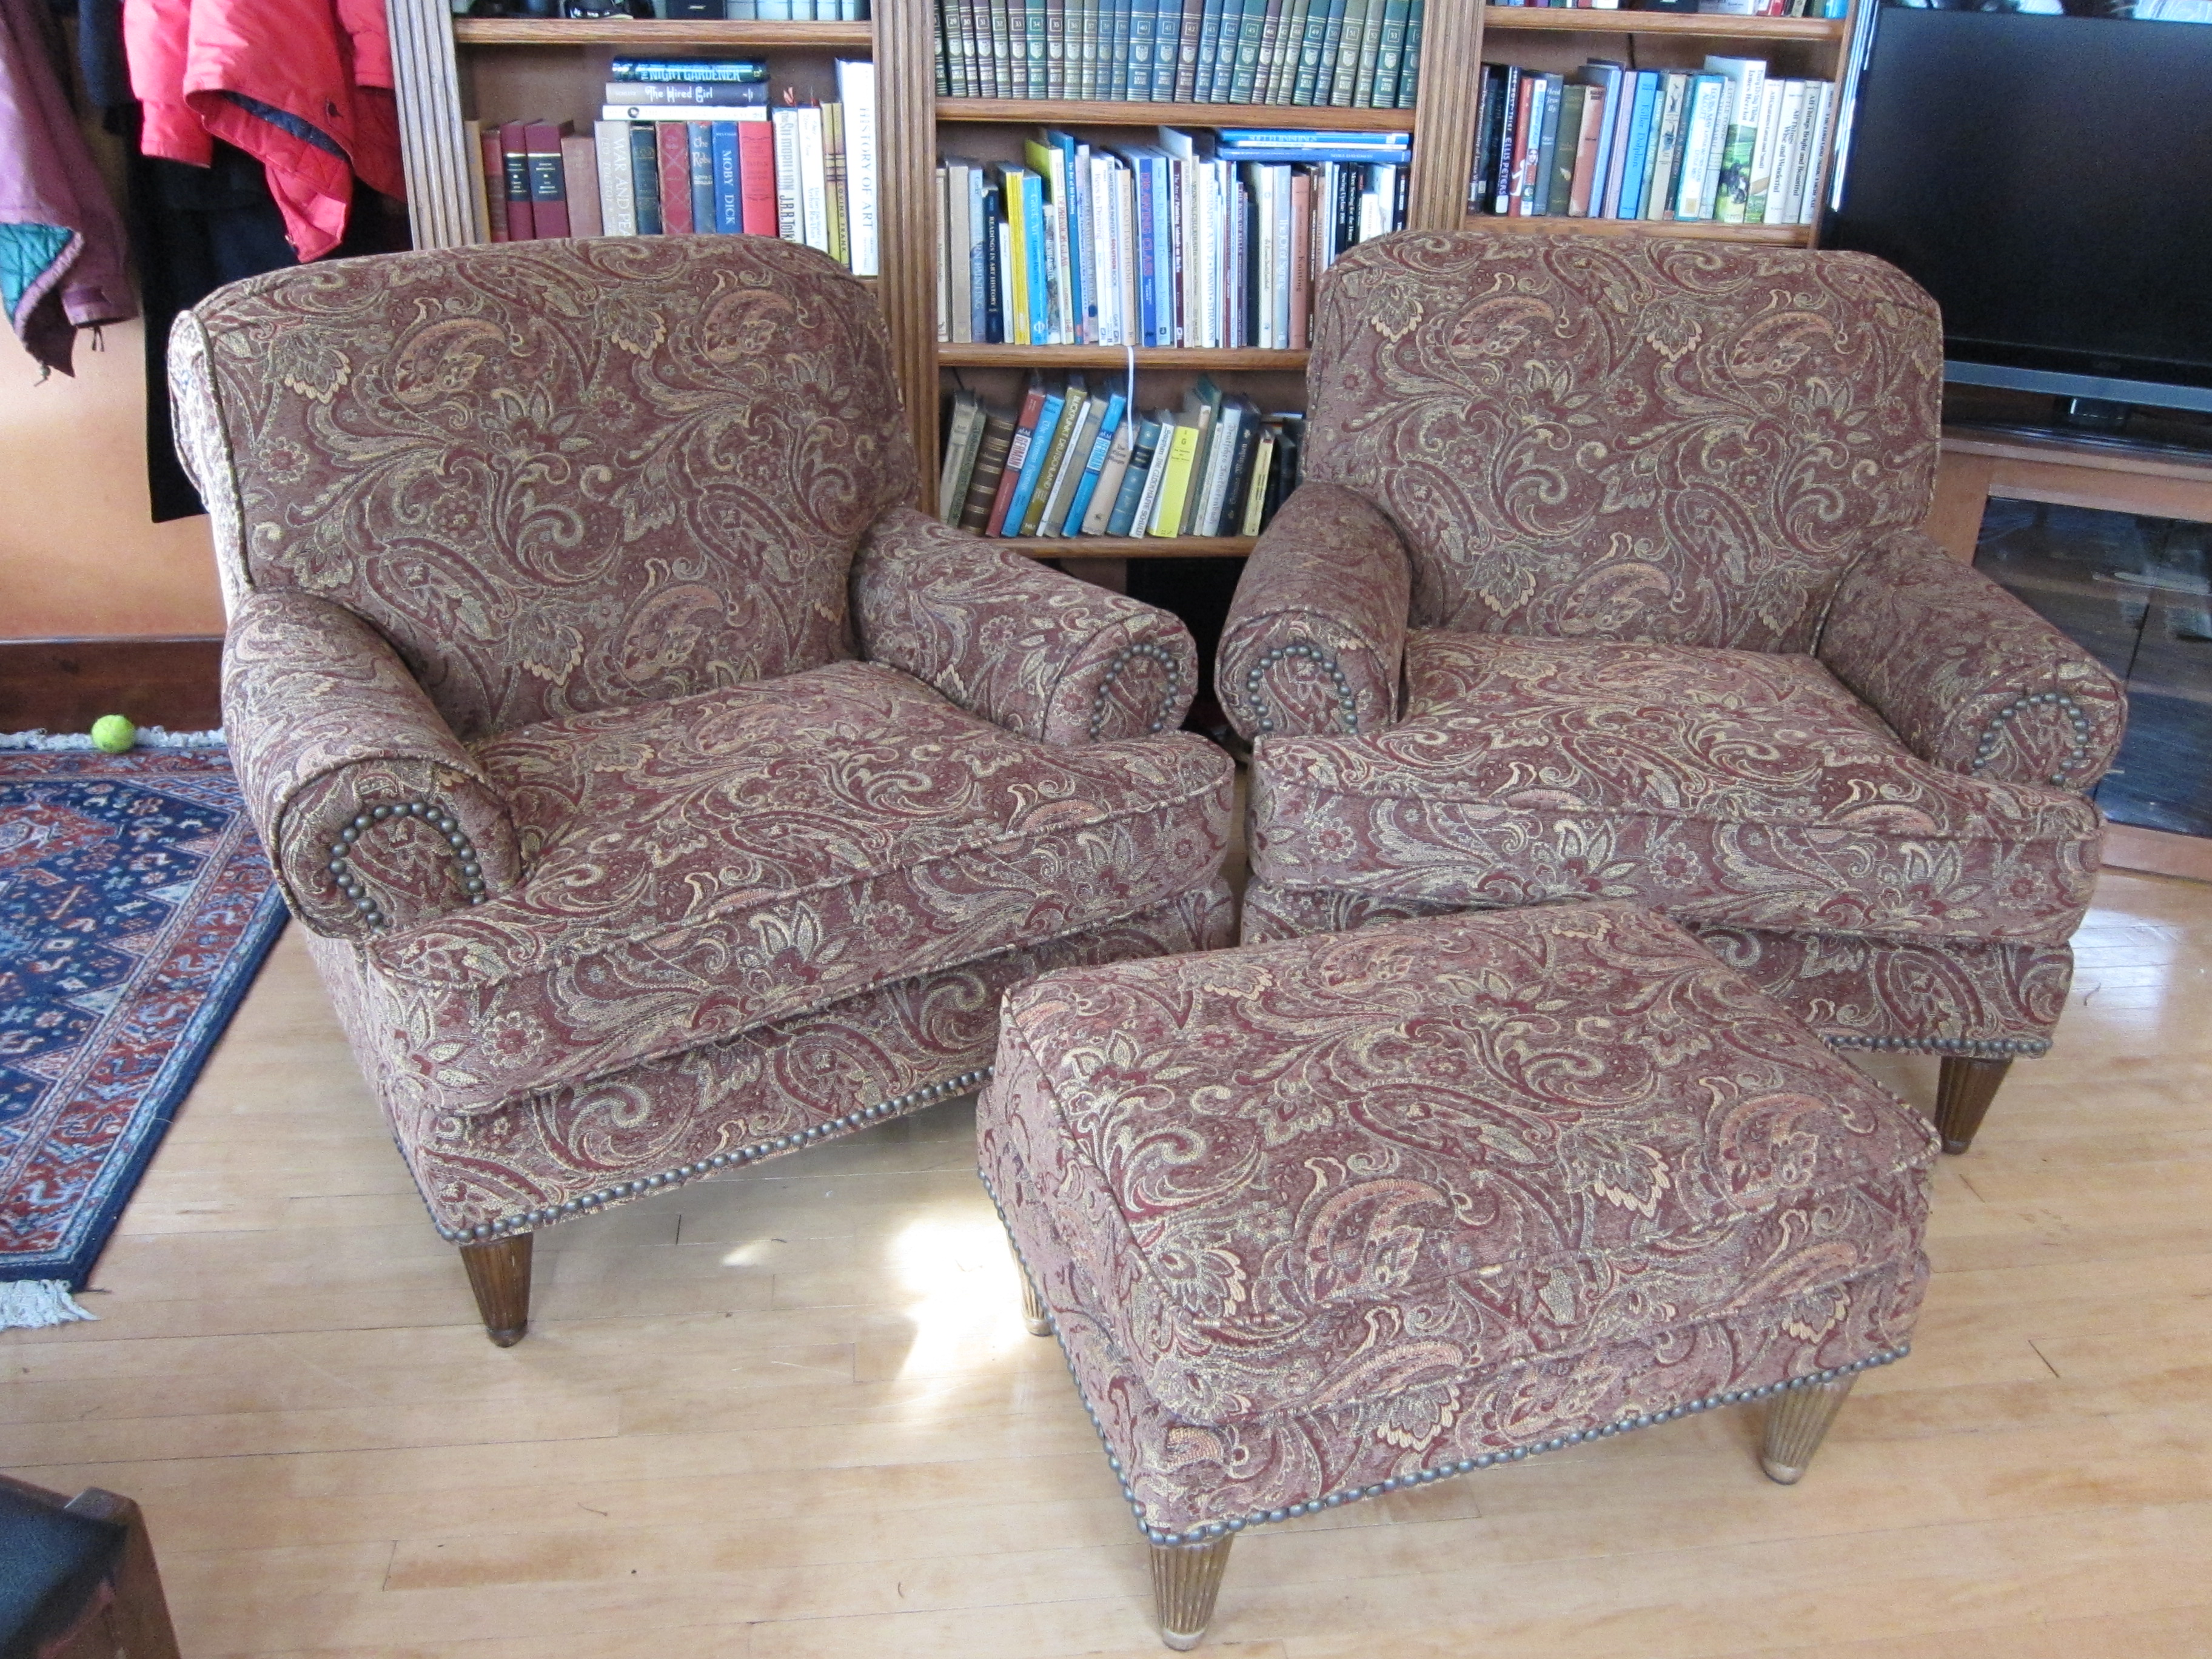 High quality chairs with hobnail detailing benefit from a beautiful new cover fabric